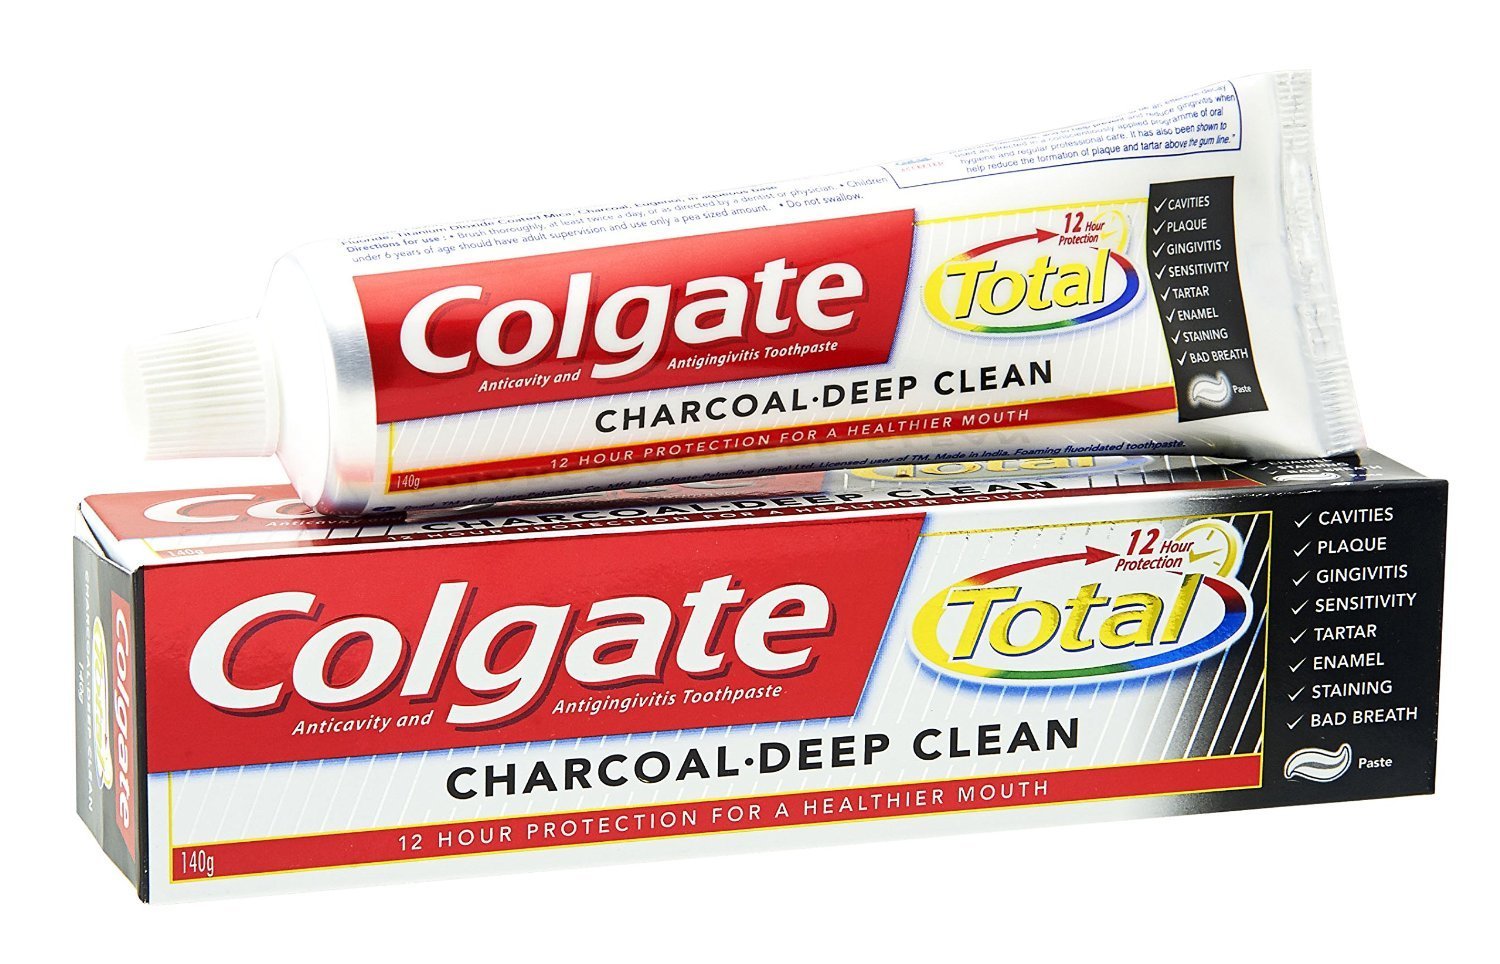 Colgate Toothpaste Total charcoal deep clean  190g